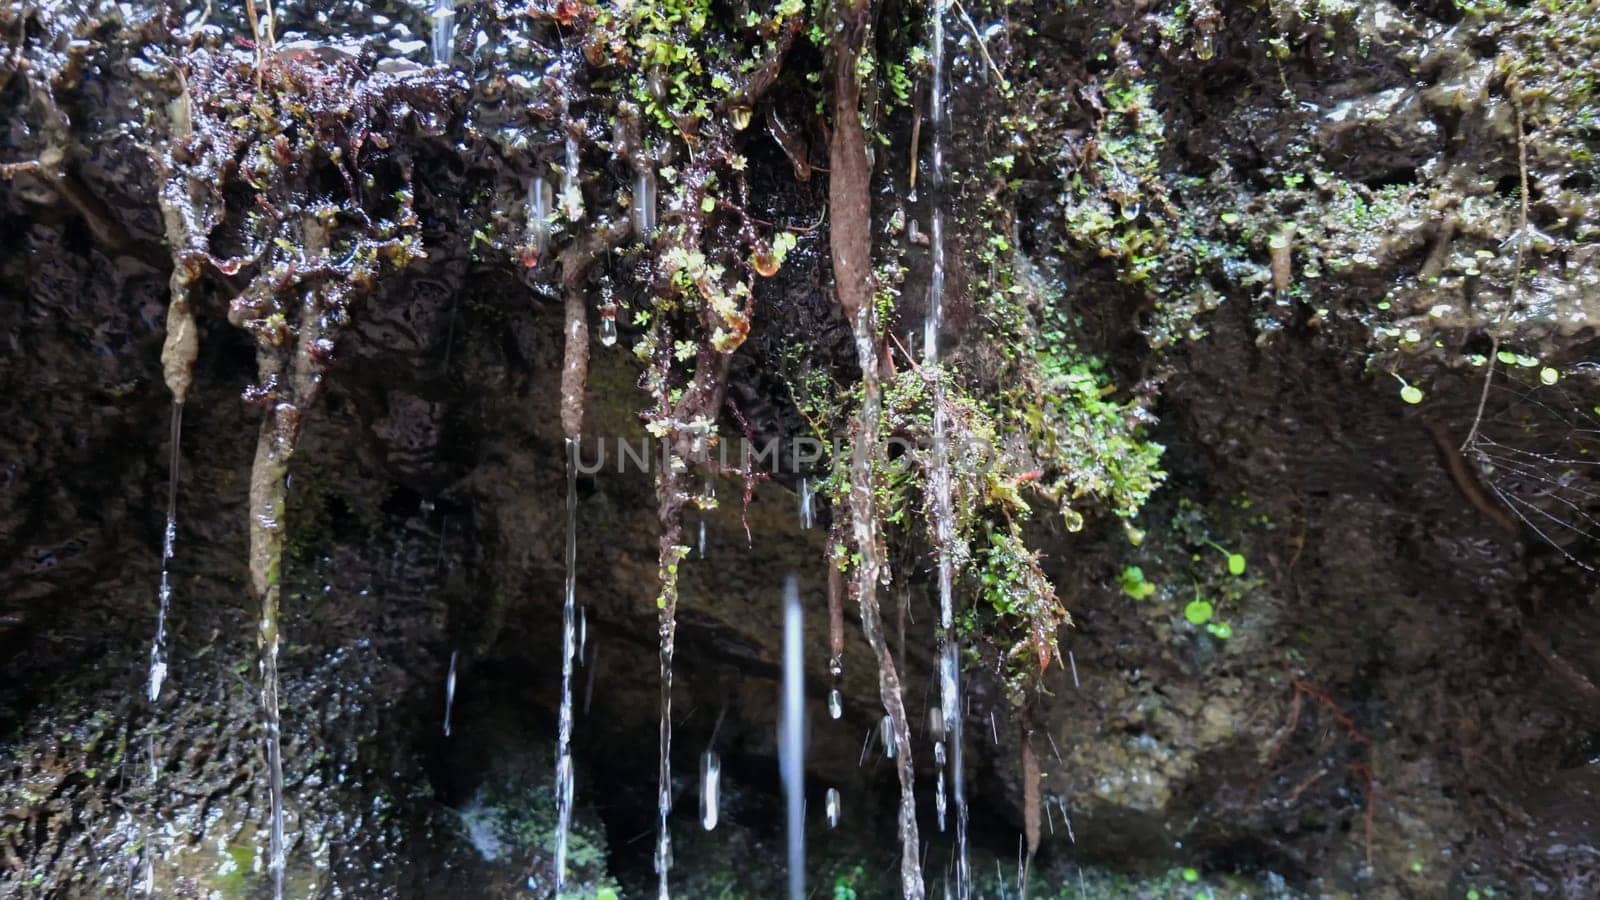 Super slow-mo video displays water drops on mossy rock.